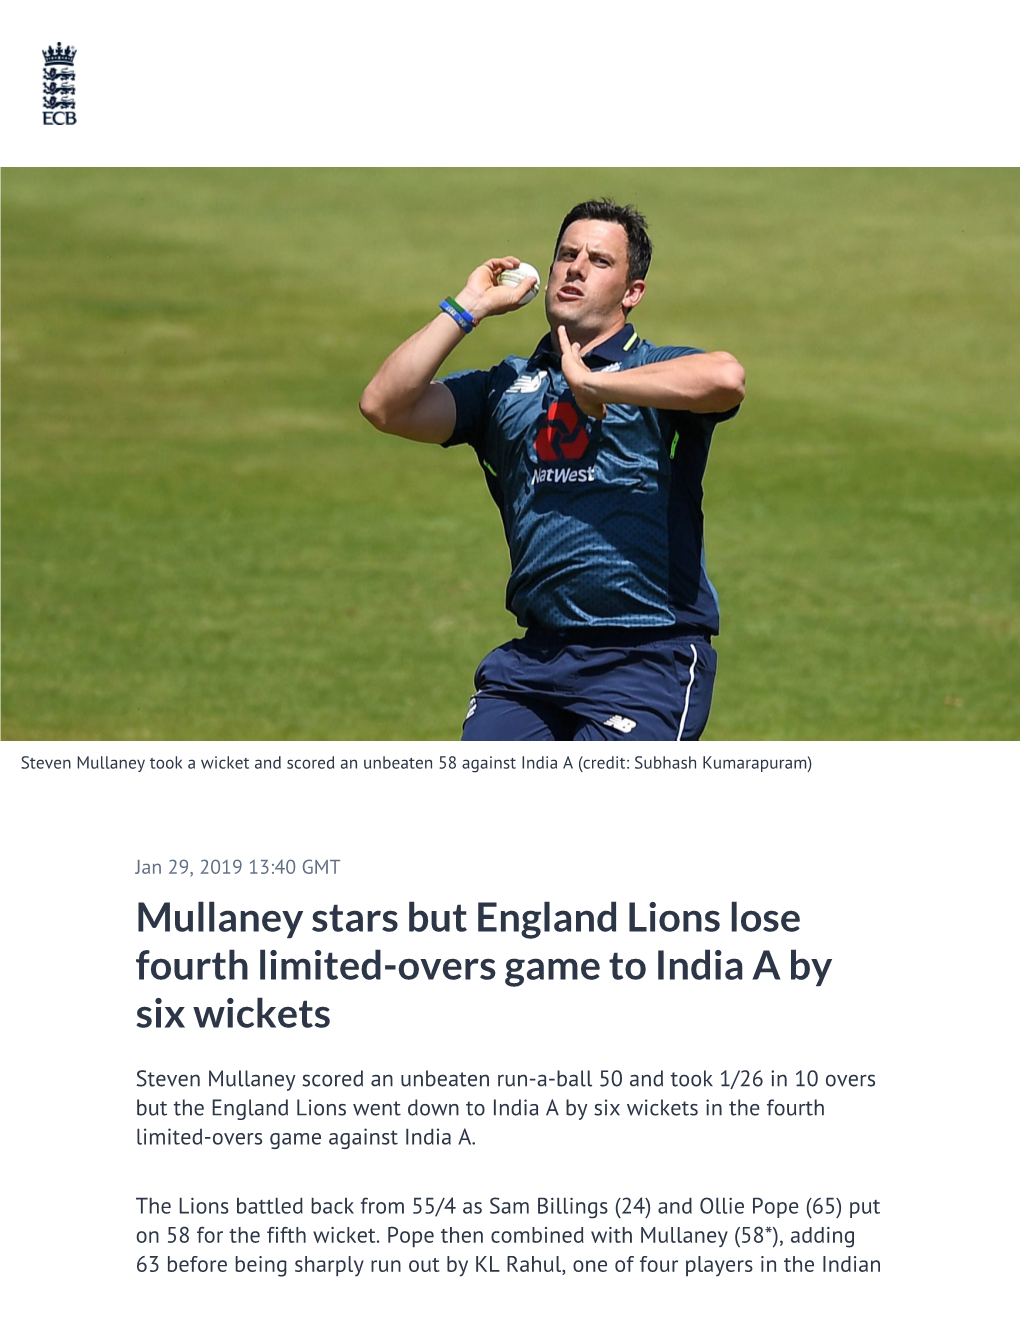 Mullaney Stars but England Lions Lose Fourth Limited-Overs Game to India a by Six Wickets